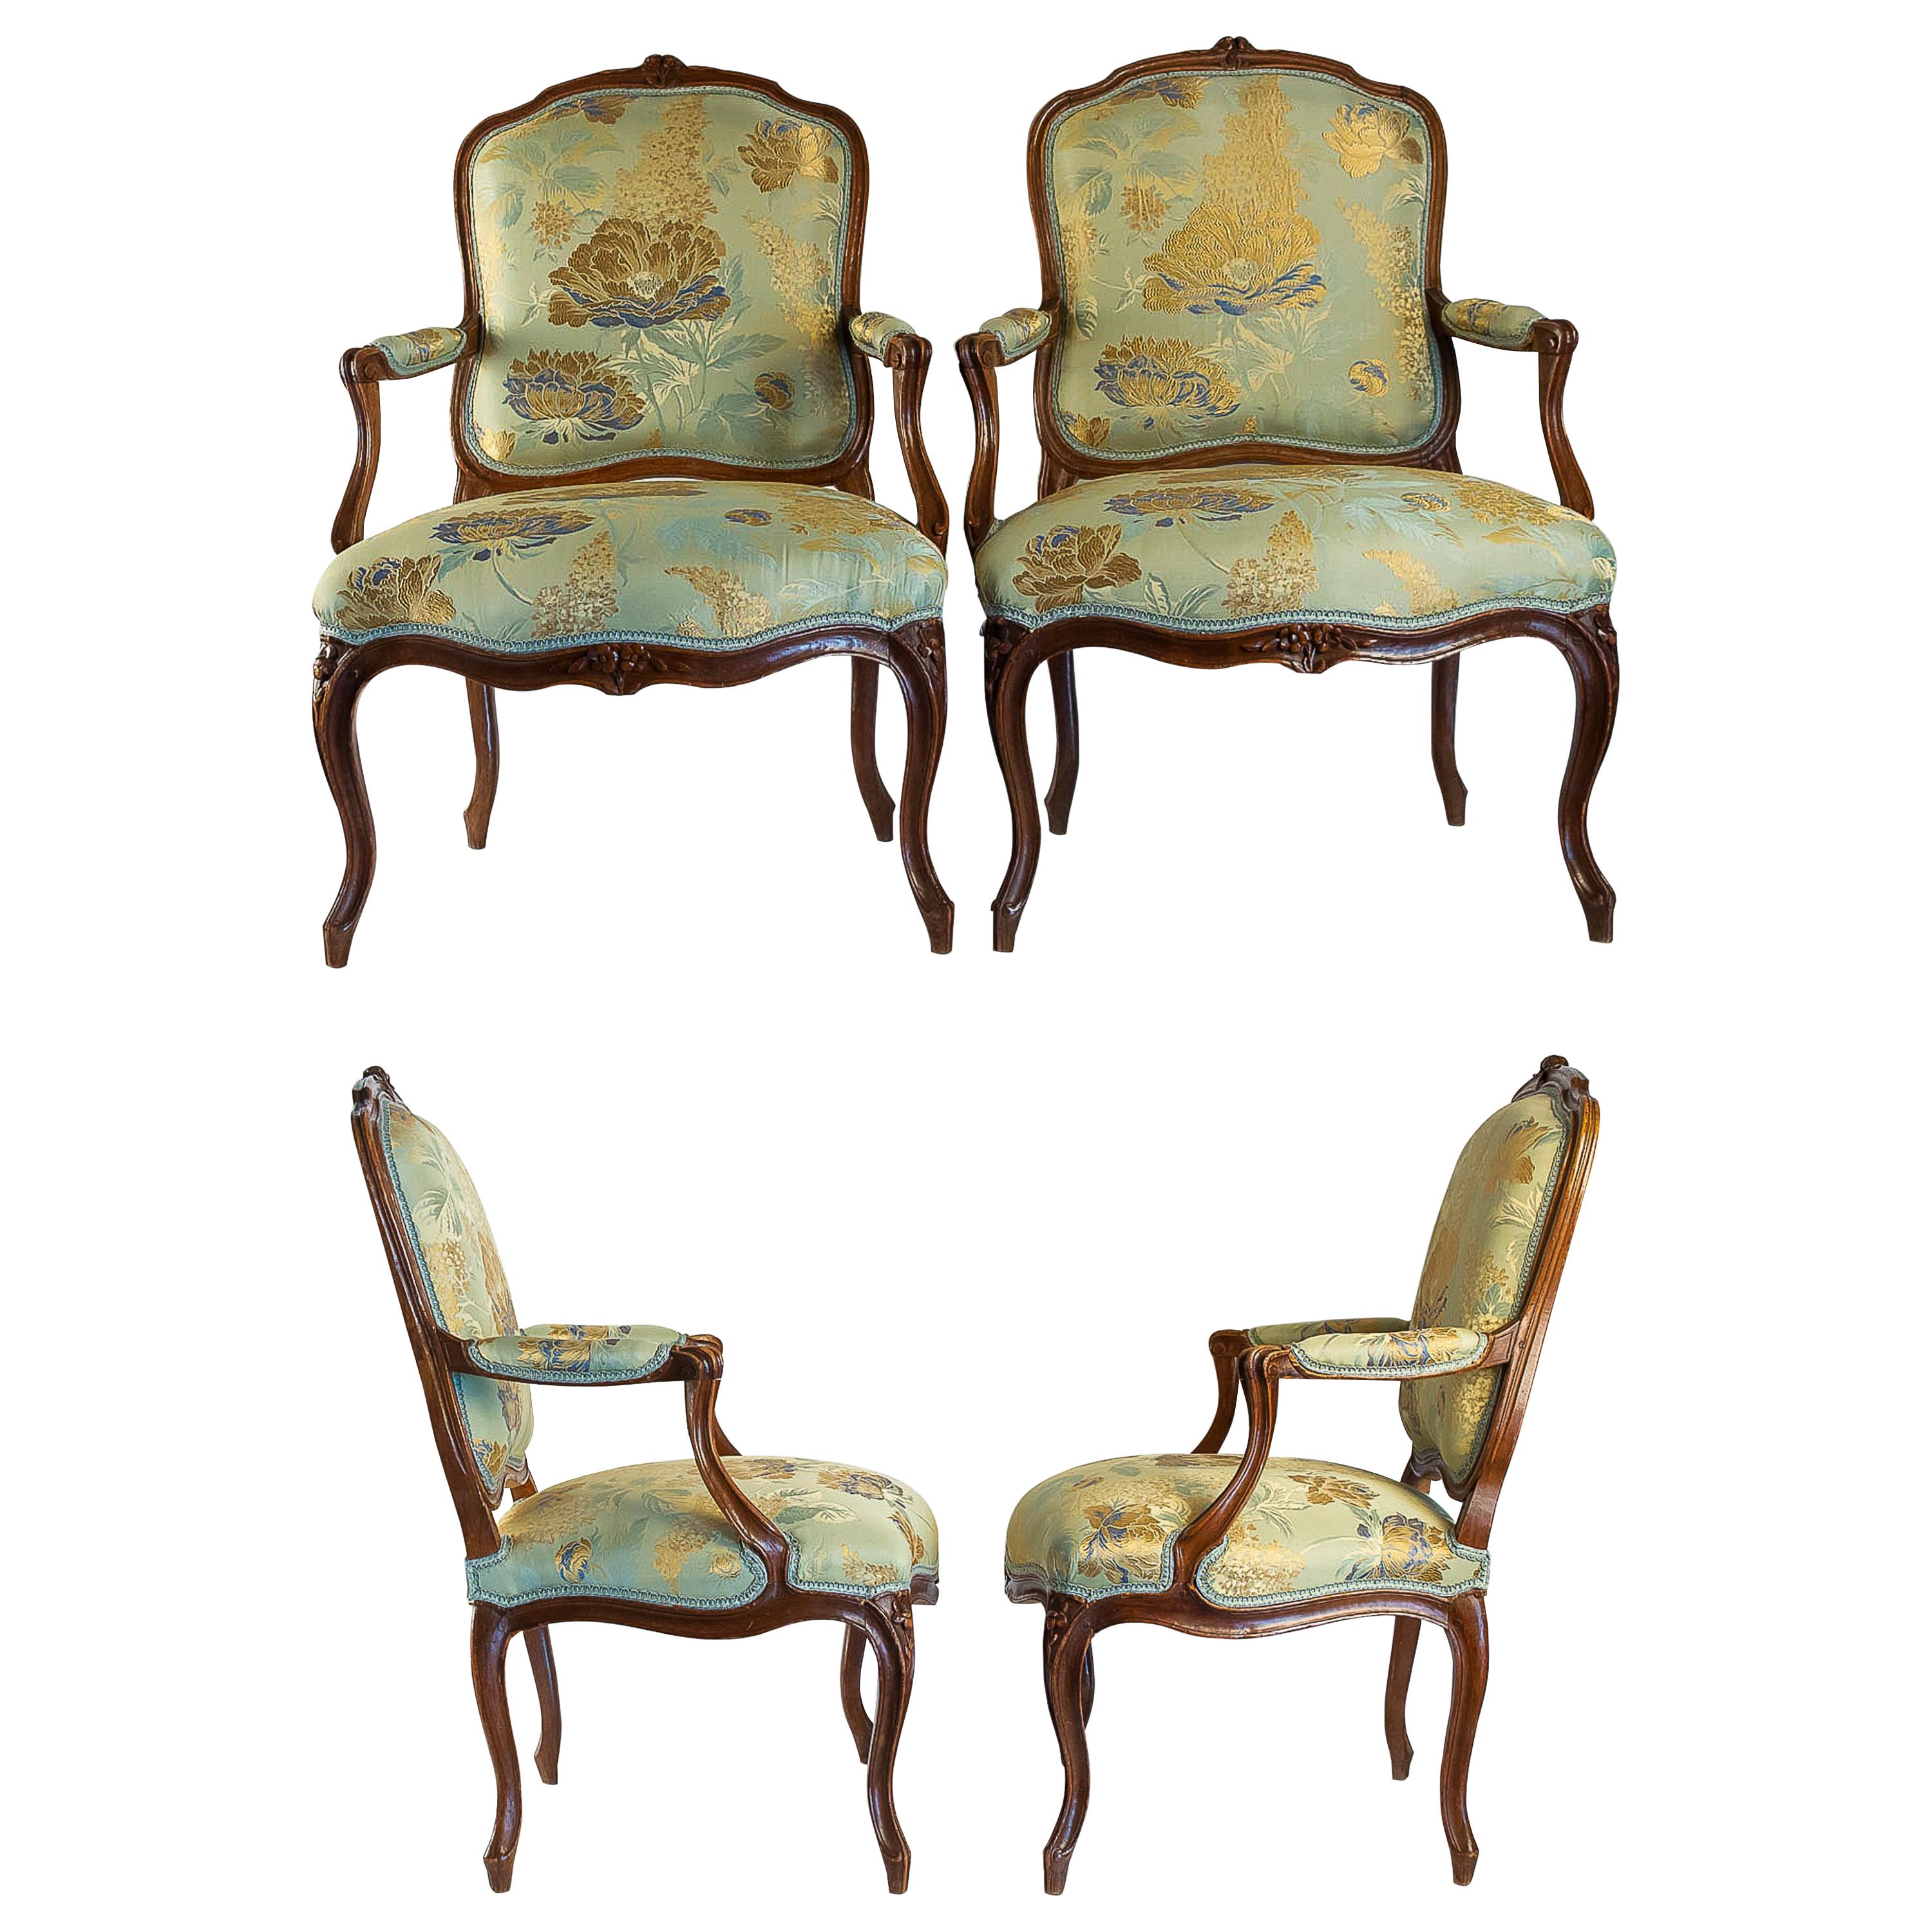 Louis XV Period Set of 4 of Large Armchairs, circa 1766-1770 by Louis Delanois